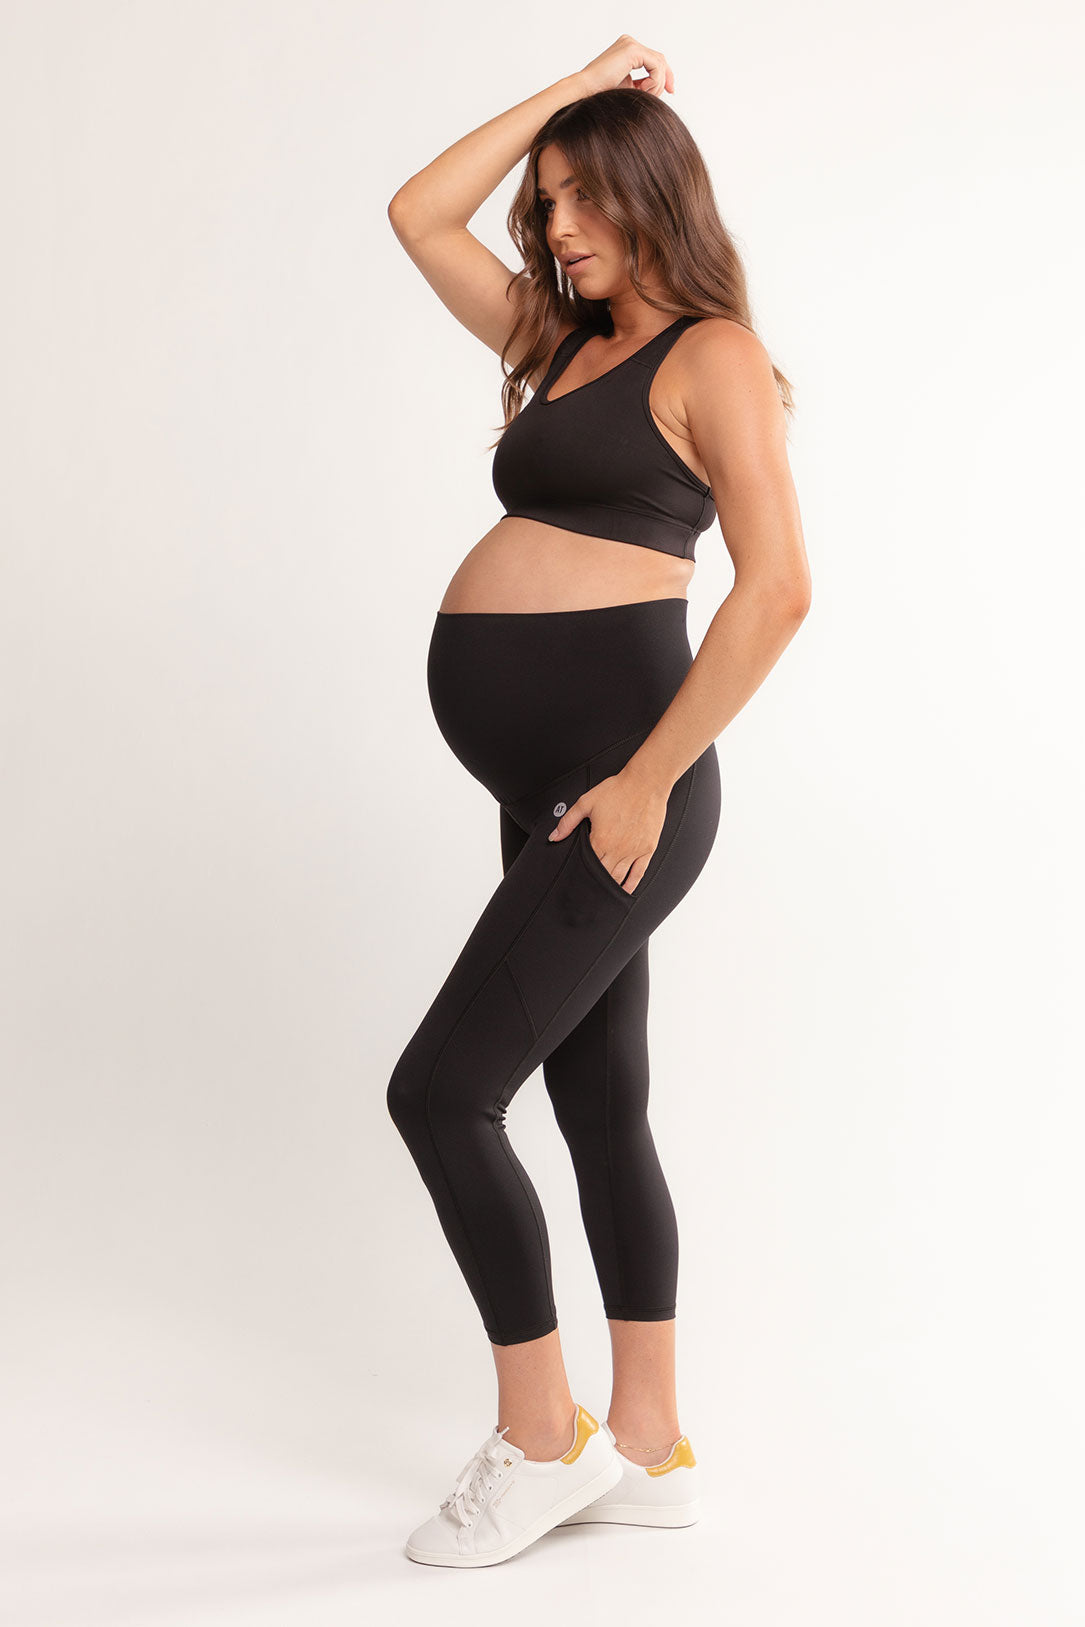 Yoga During Pregnancy: Do's and Don'ts. Nike IN